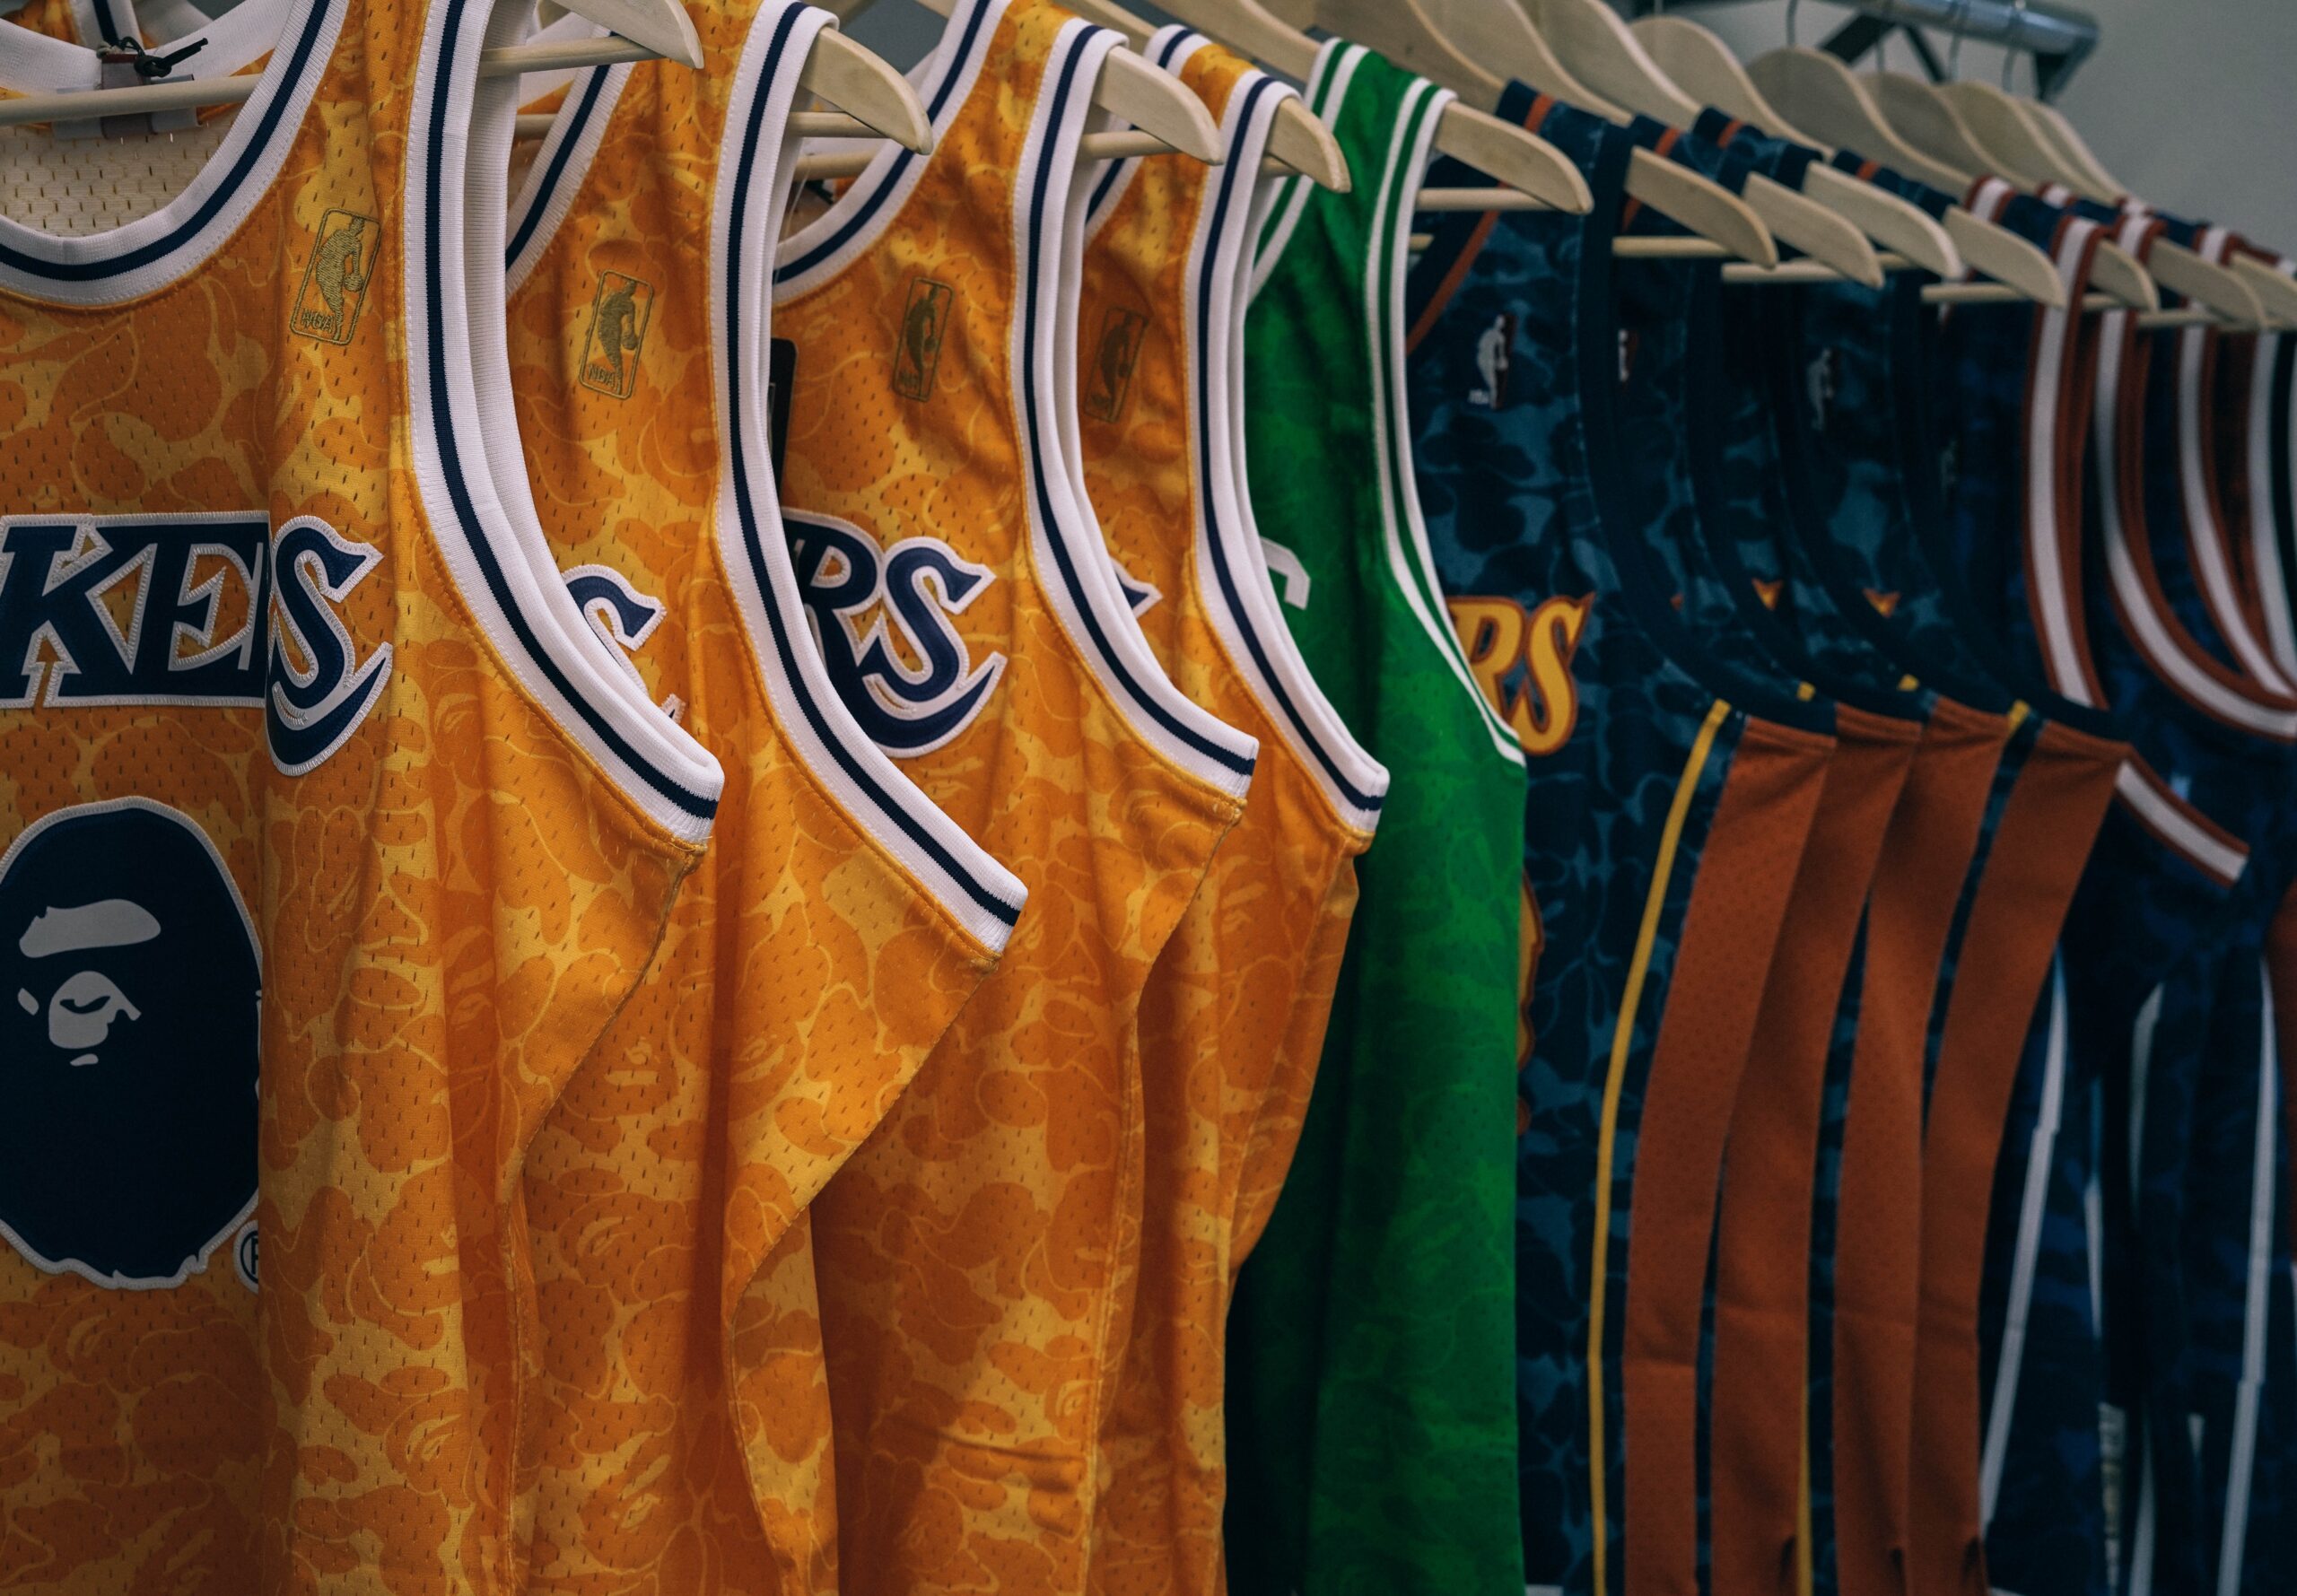 Sports jerseys and items for man cave ideas. Pictured: Lakers Jerseys.